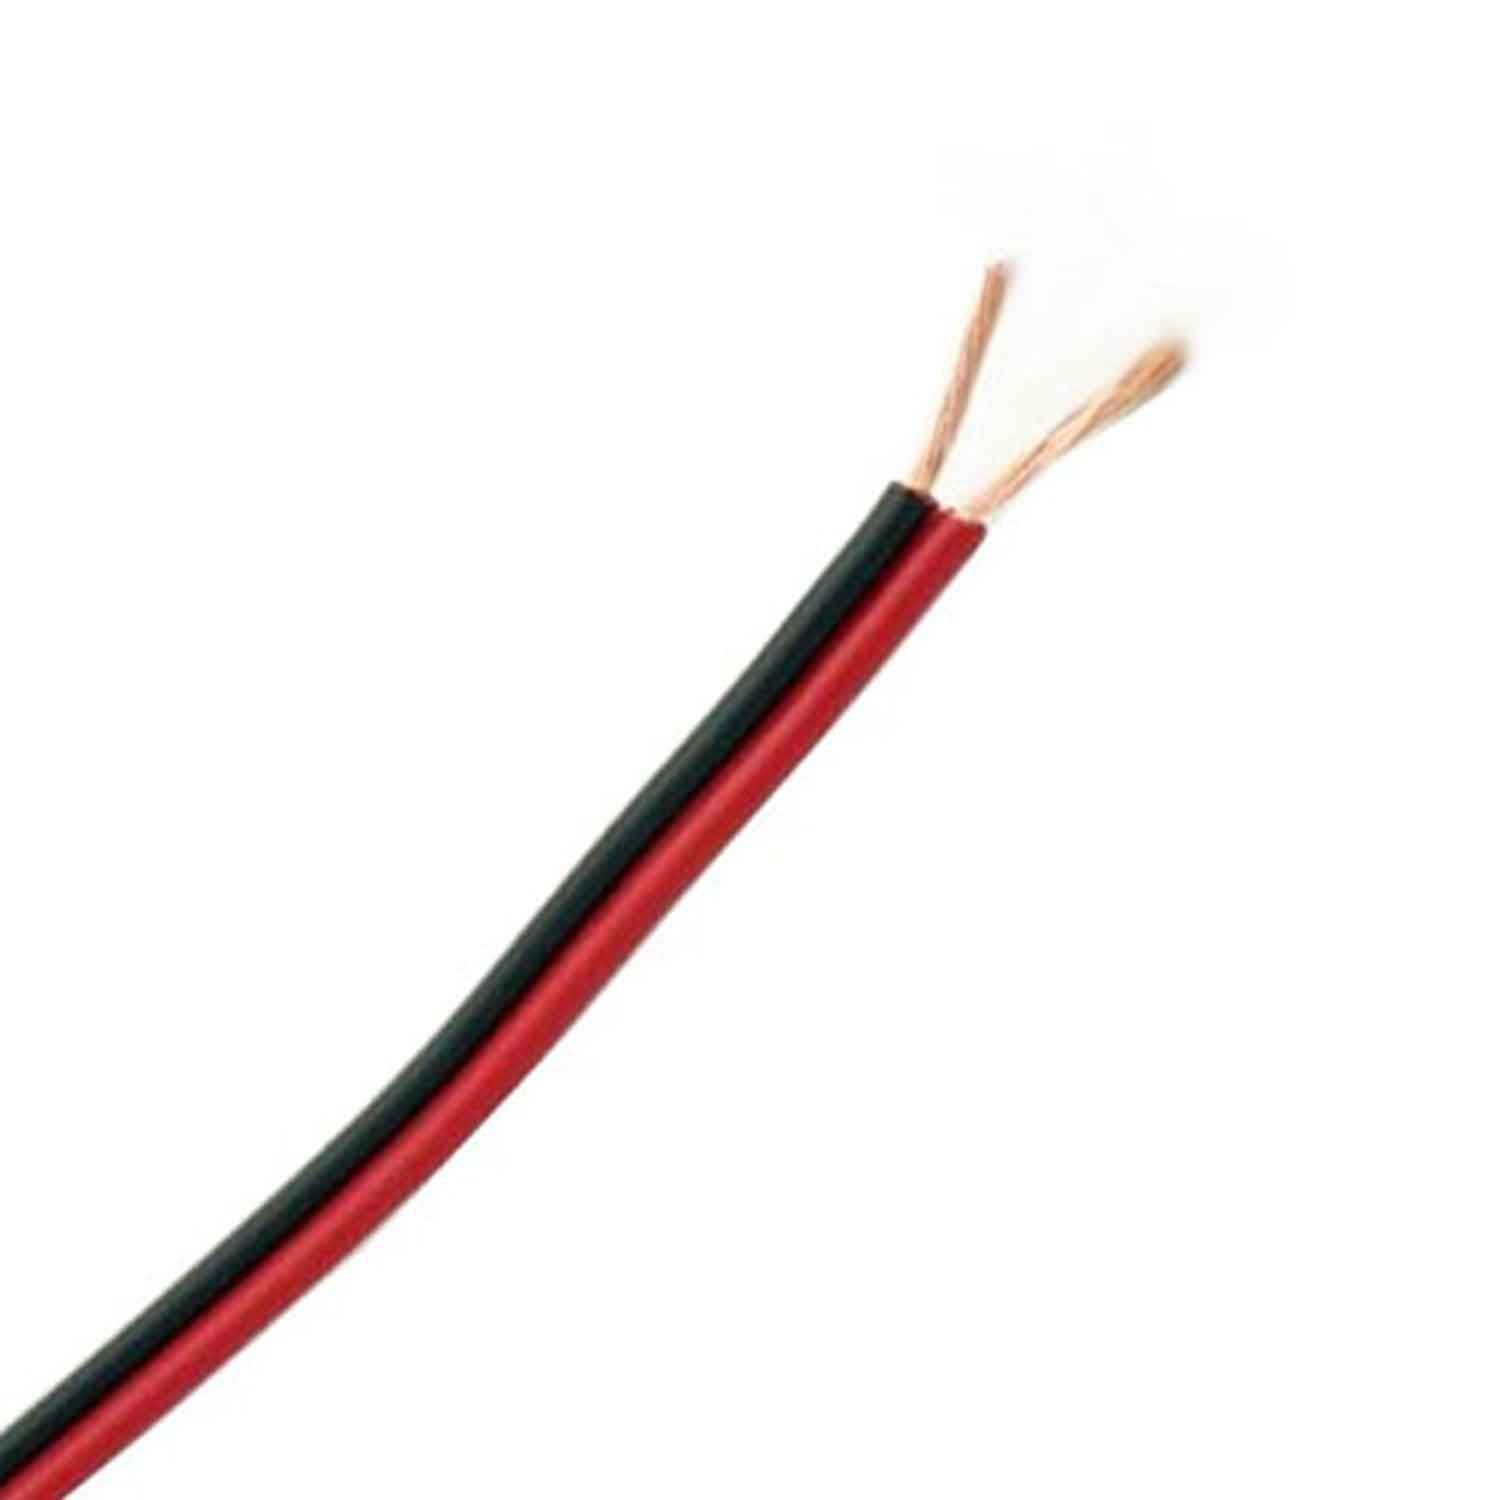 RB16-50 Red/Black 2 Conductor Hook Up Wire, 50 Foot, 16 AWG, Stranded